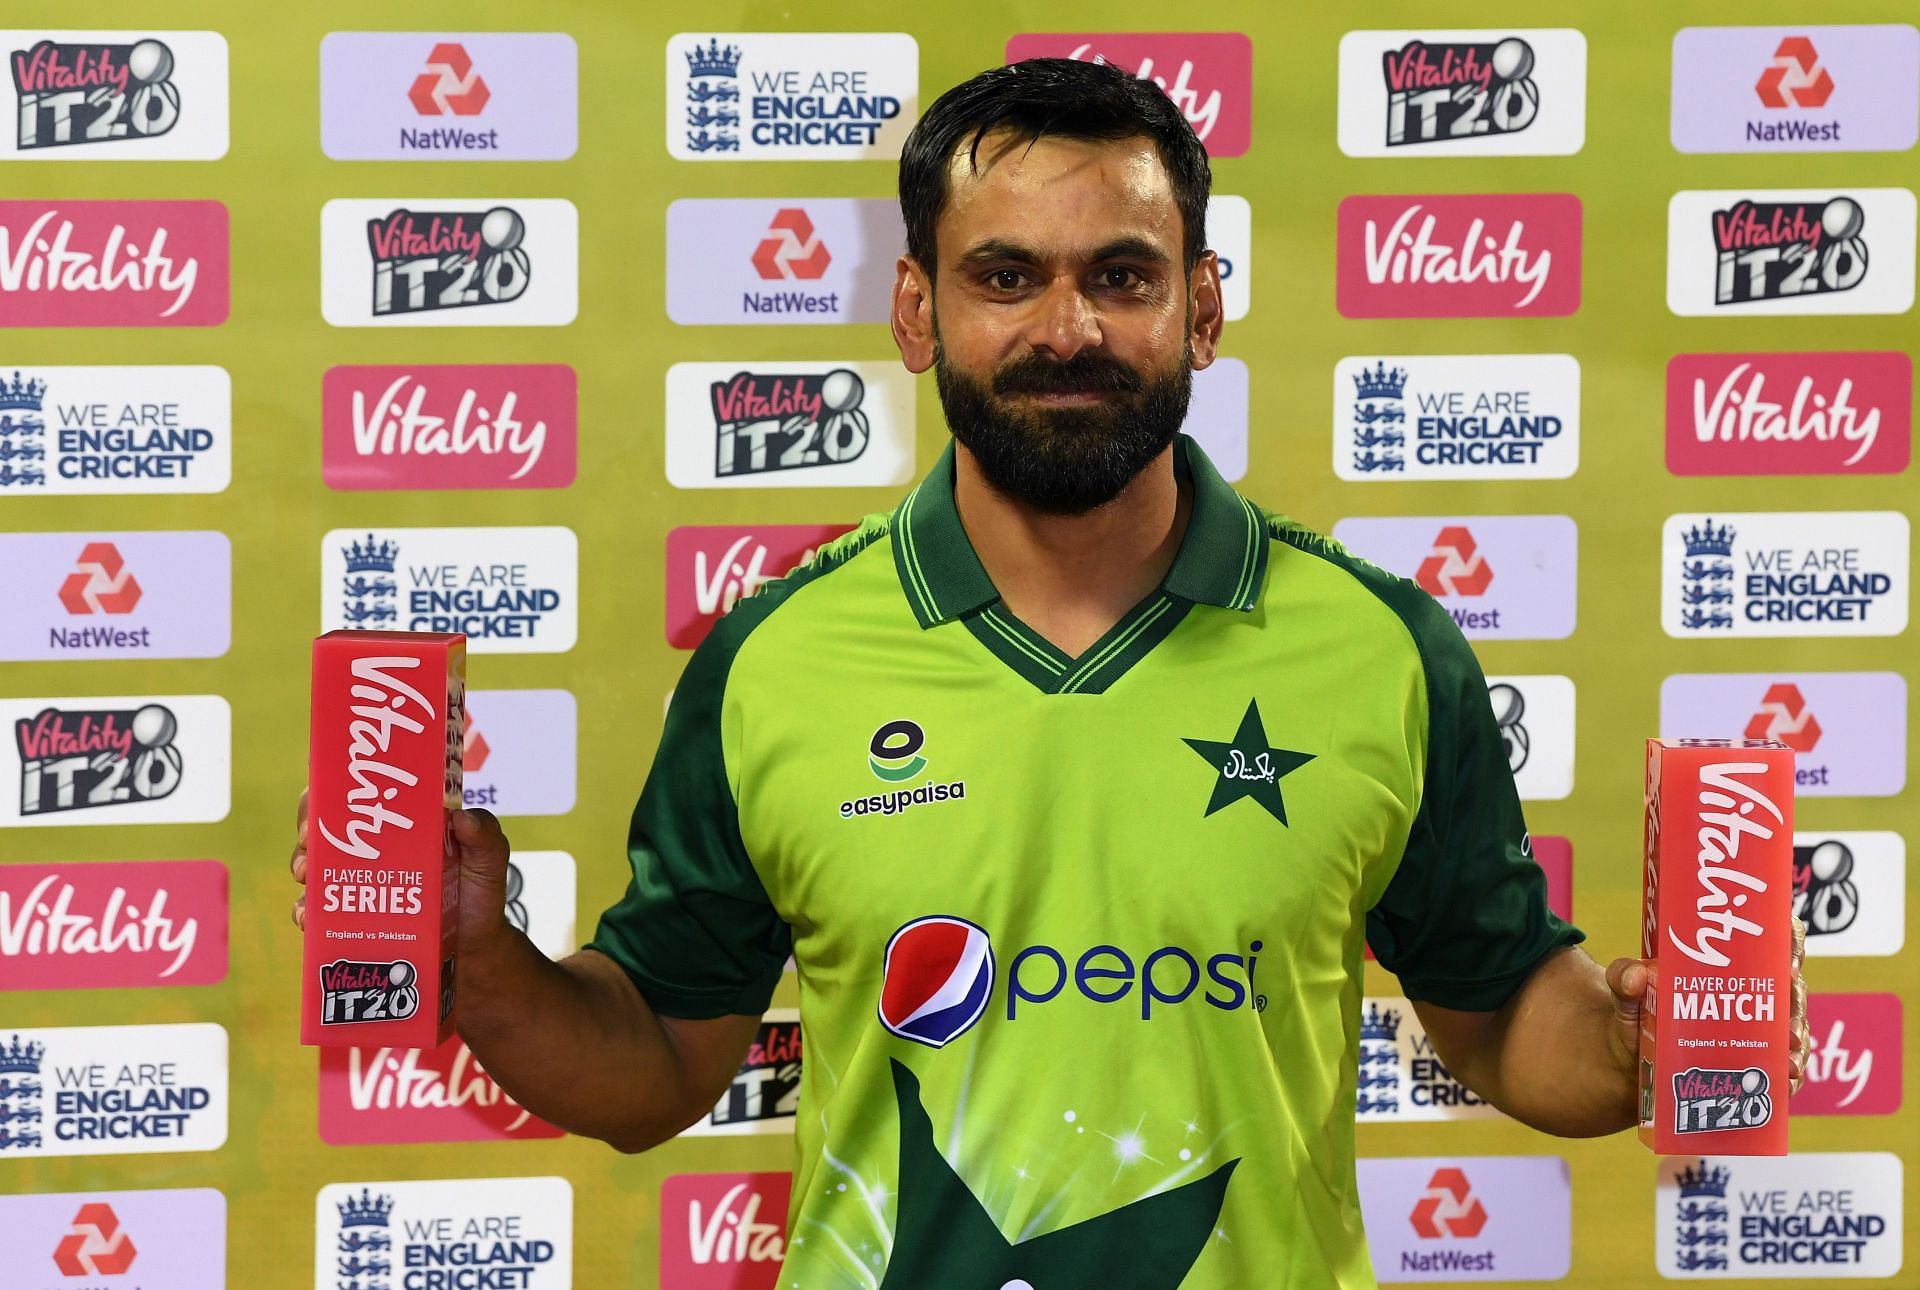 Mohammad Hafeez returns to form against Namibia with a quickfire 32 off 16